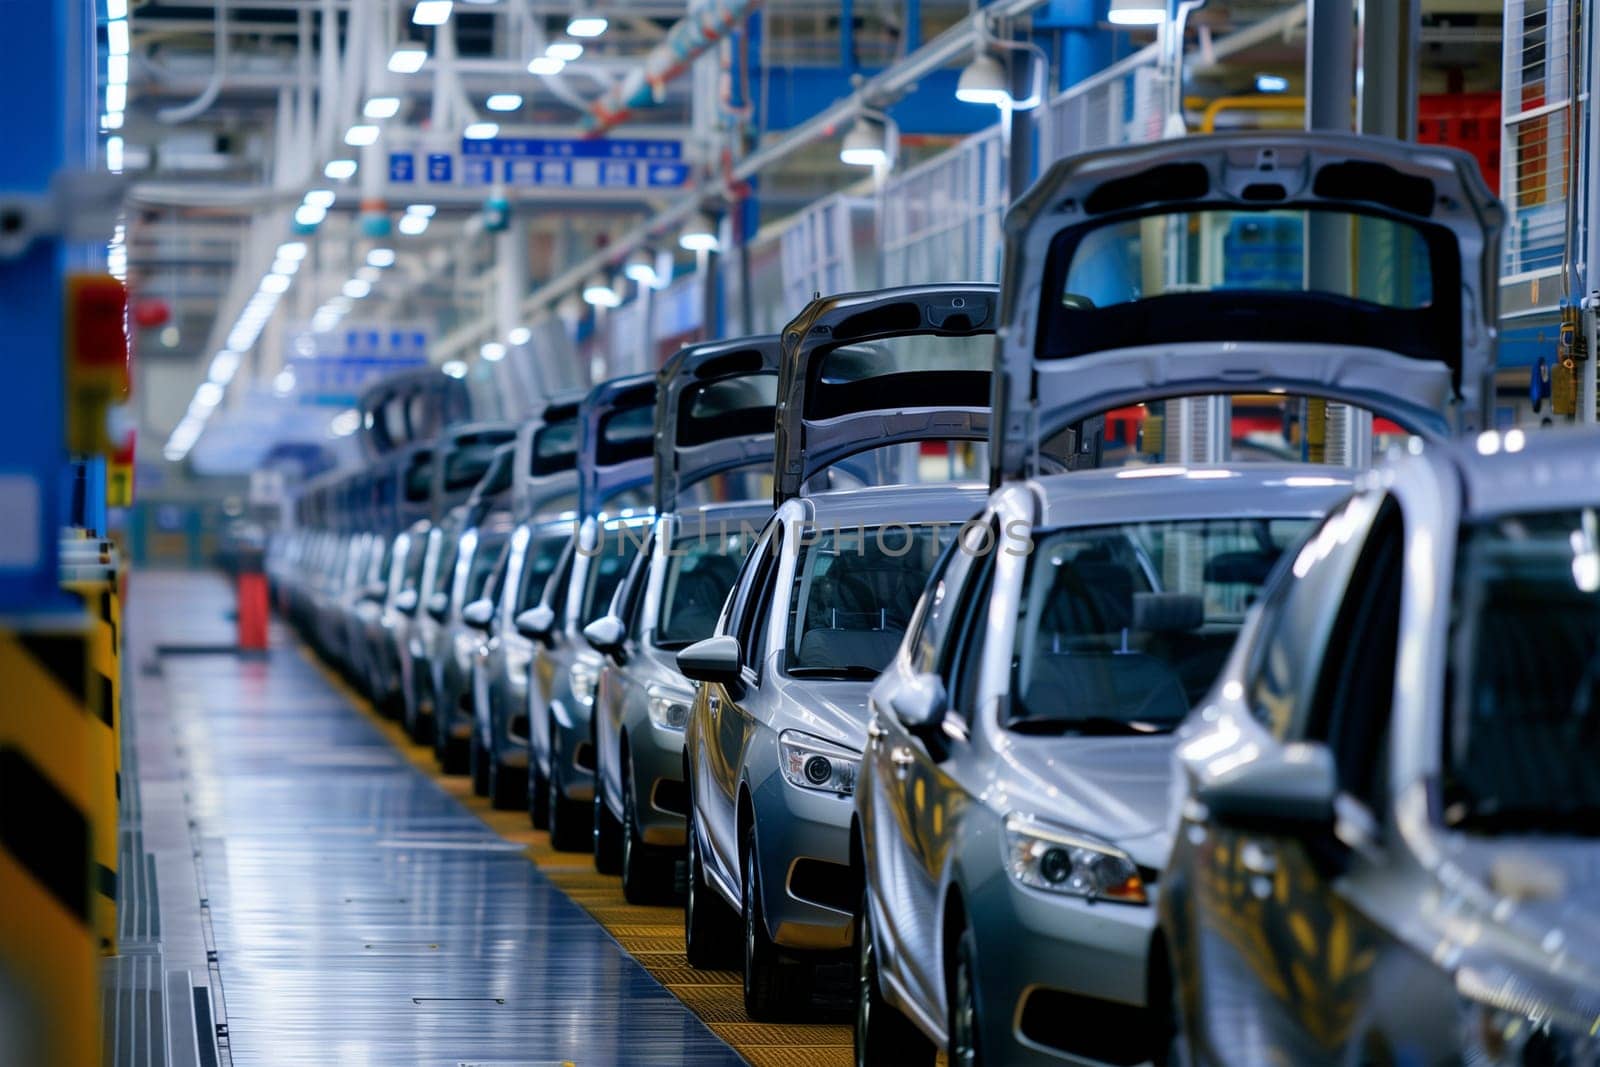 Cars moving along an assembly line in a factory with workers assembling and installing parts.